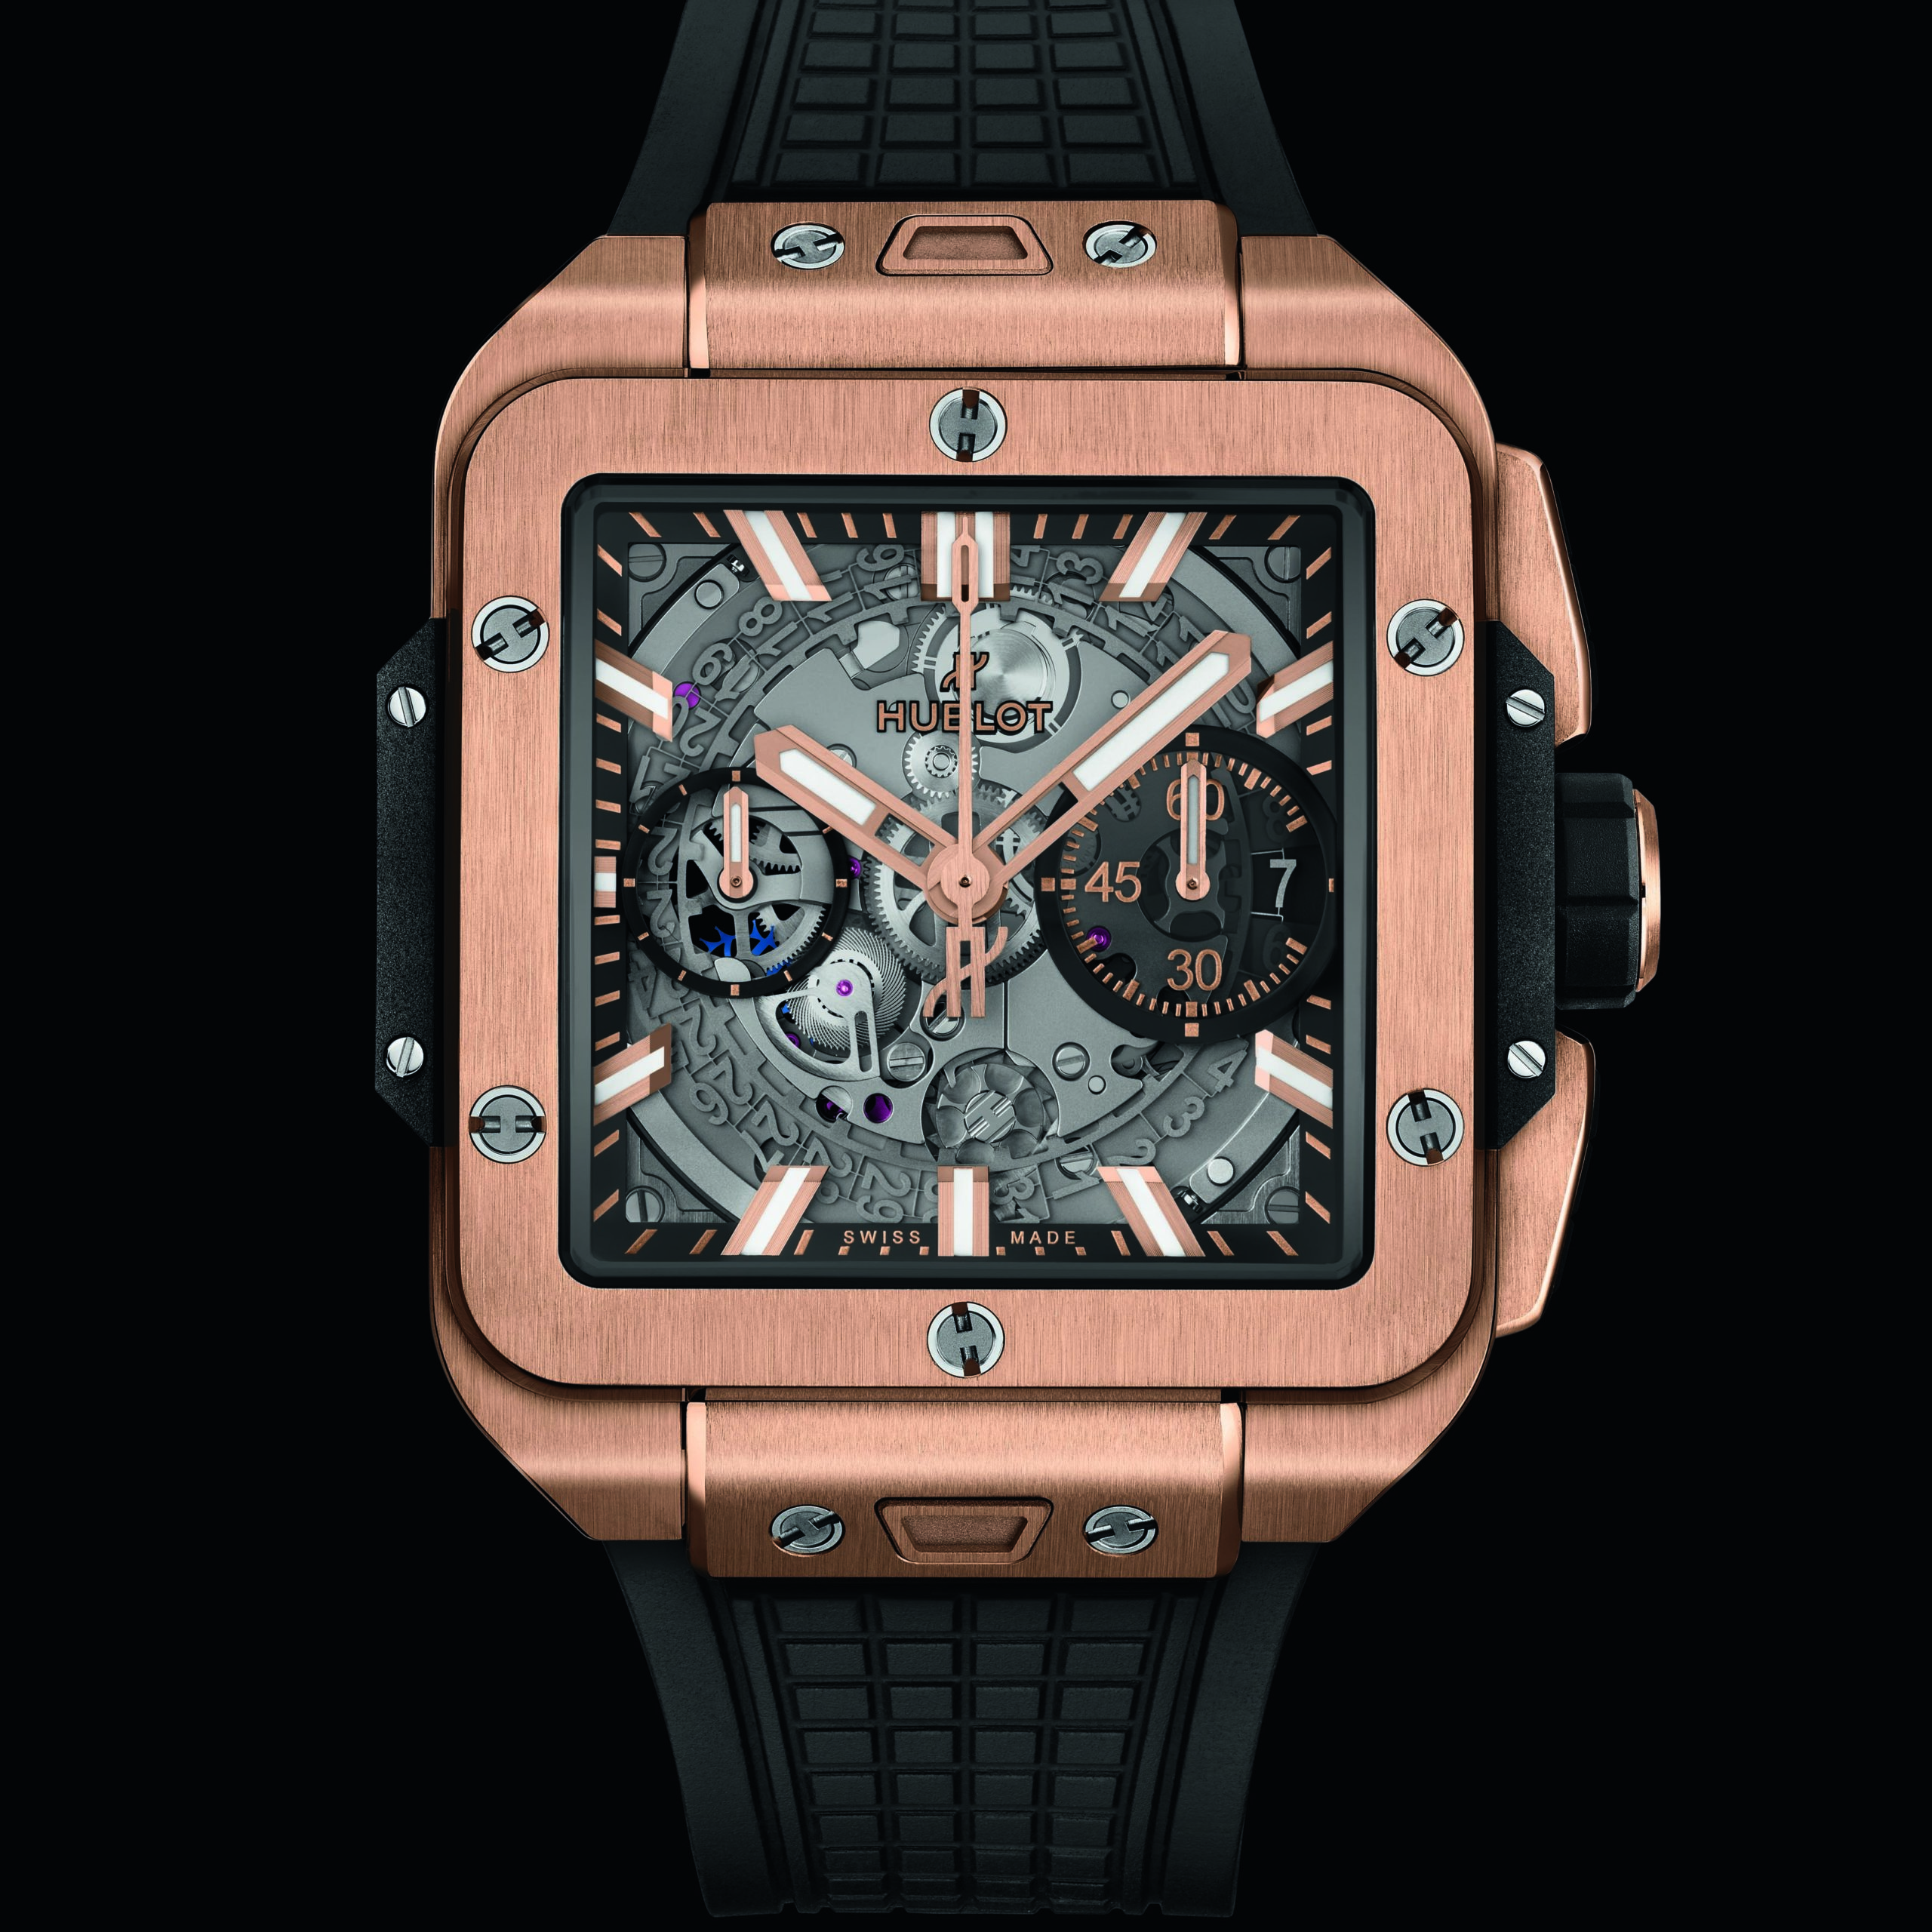 Hublot Novelties from Watches and Wonders 2022